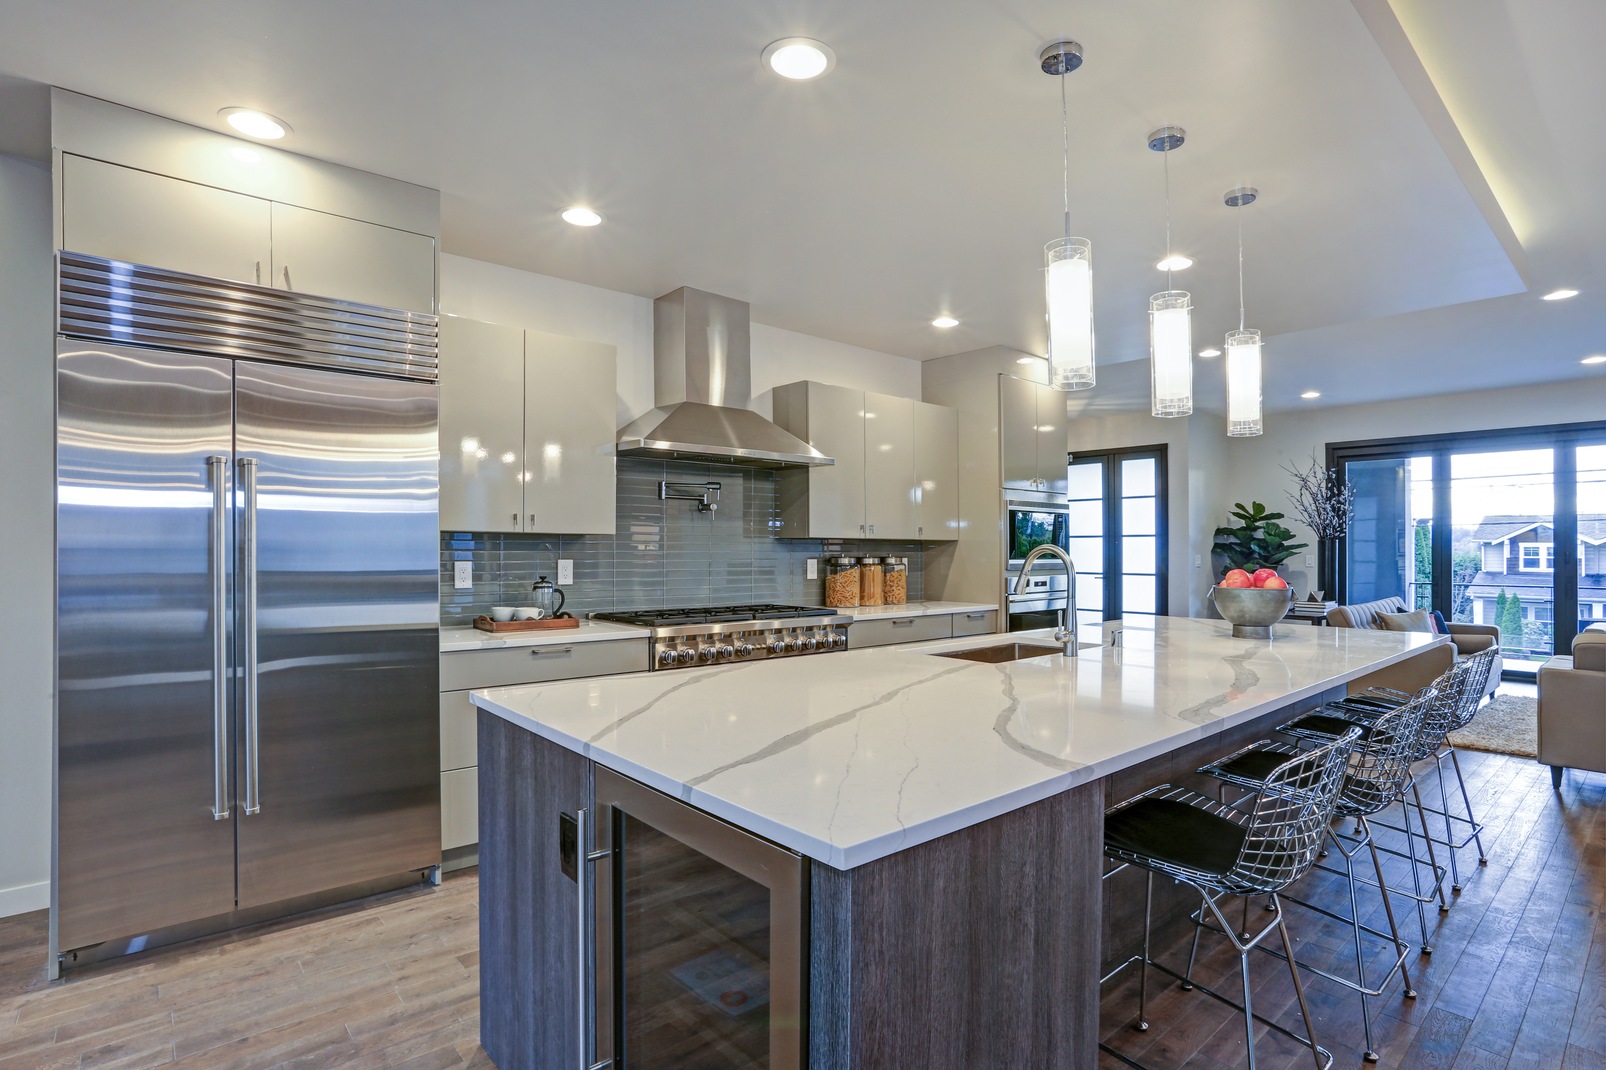 5 More Design Ideas For Your Custom Home Kitchen